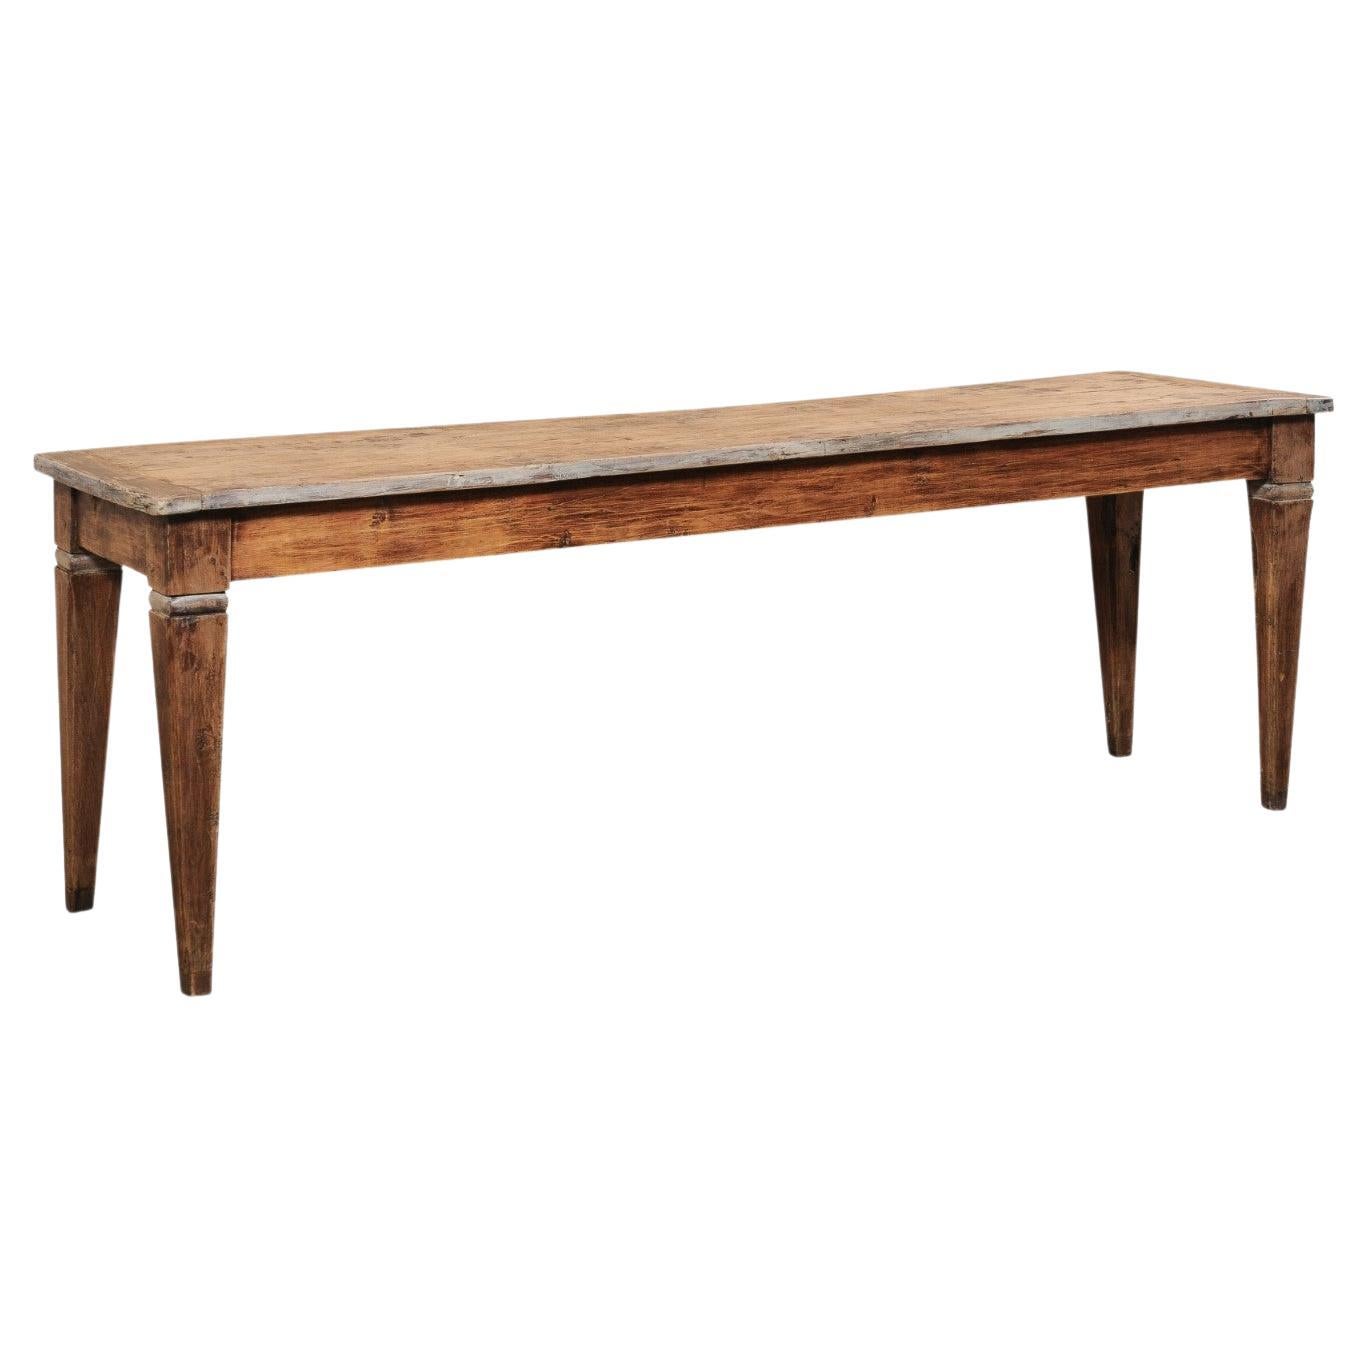 18th Century Italian Rustic Wooden Console Table